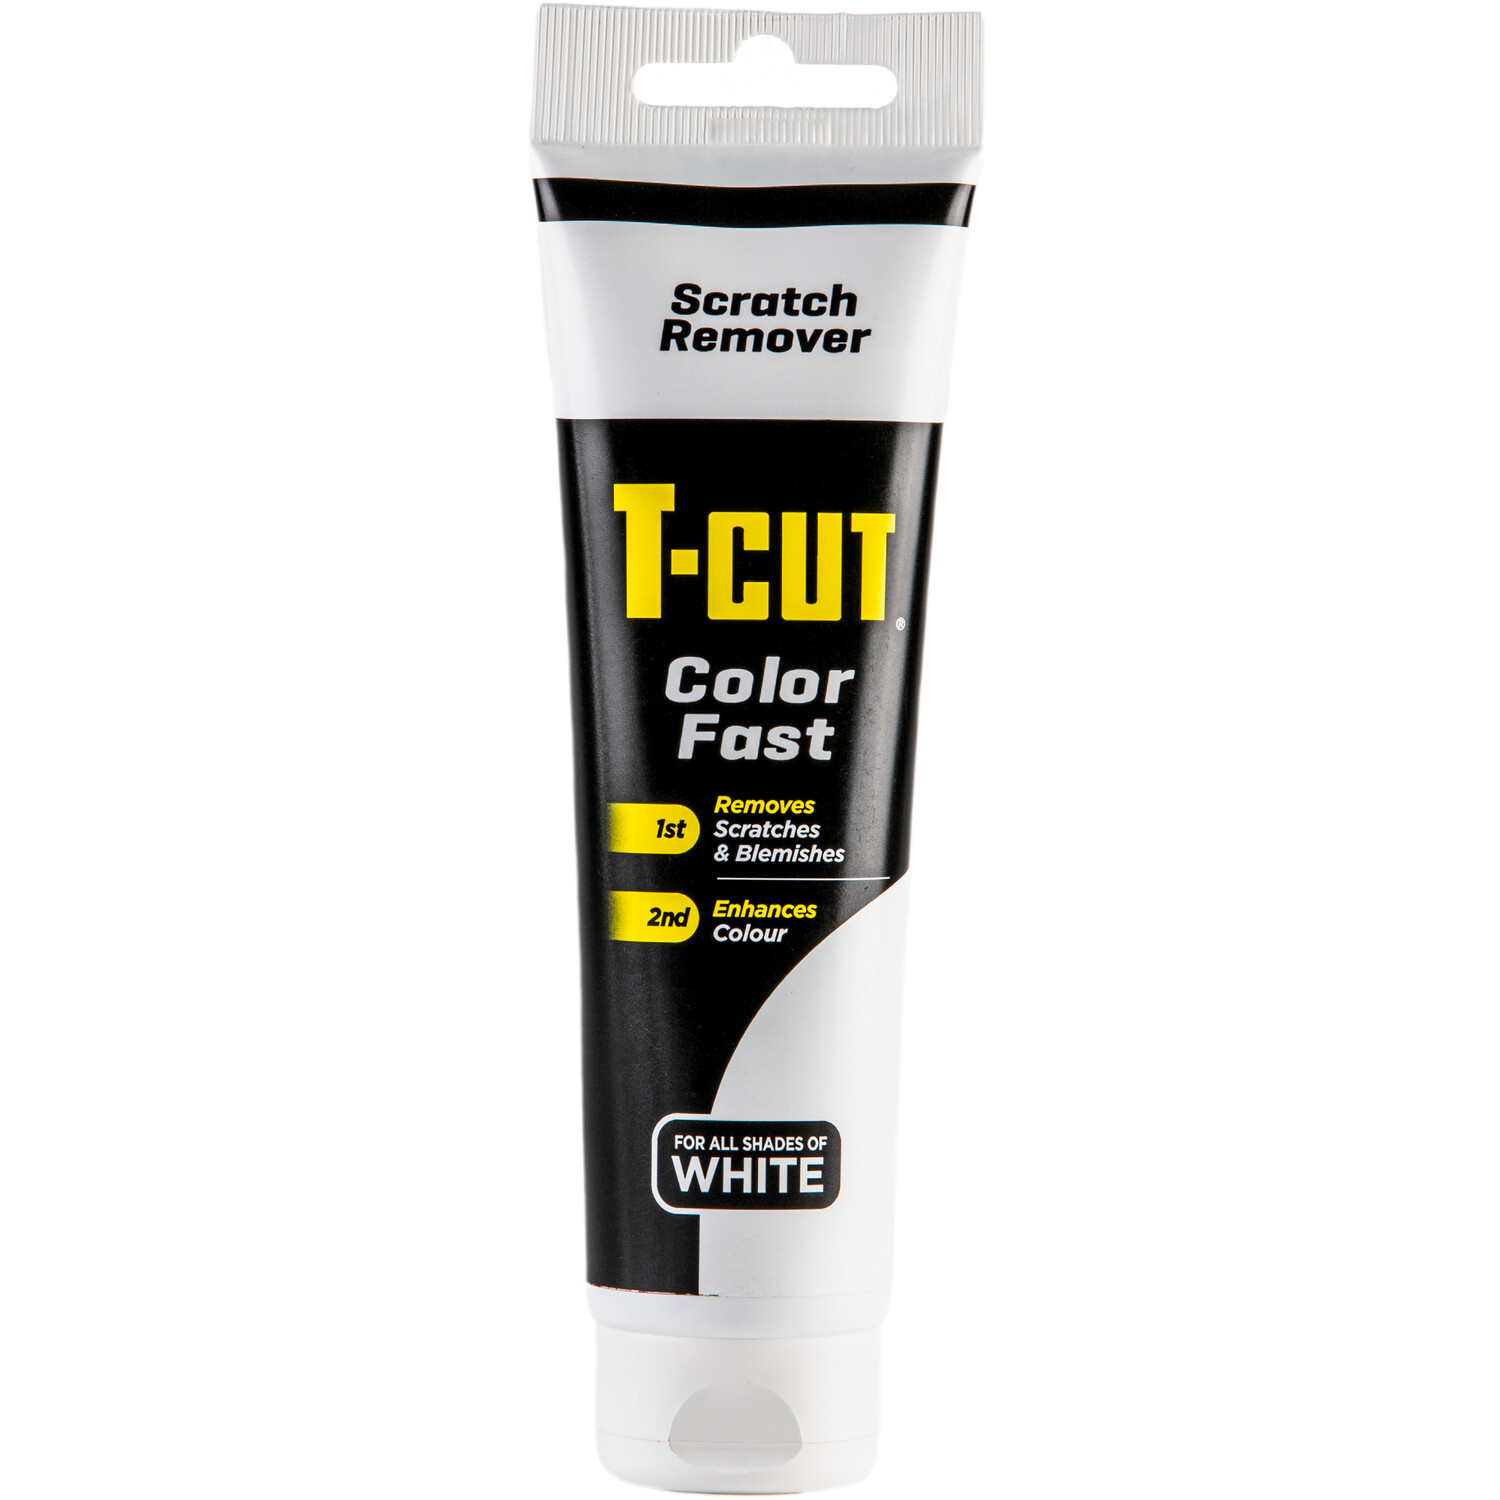 T-Cut Color Fast Scratch Remover - White Image 1